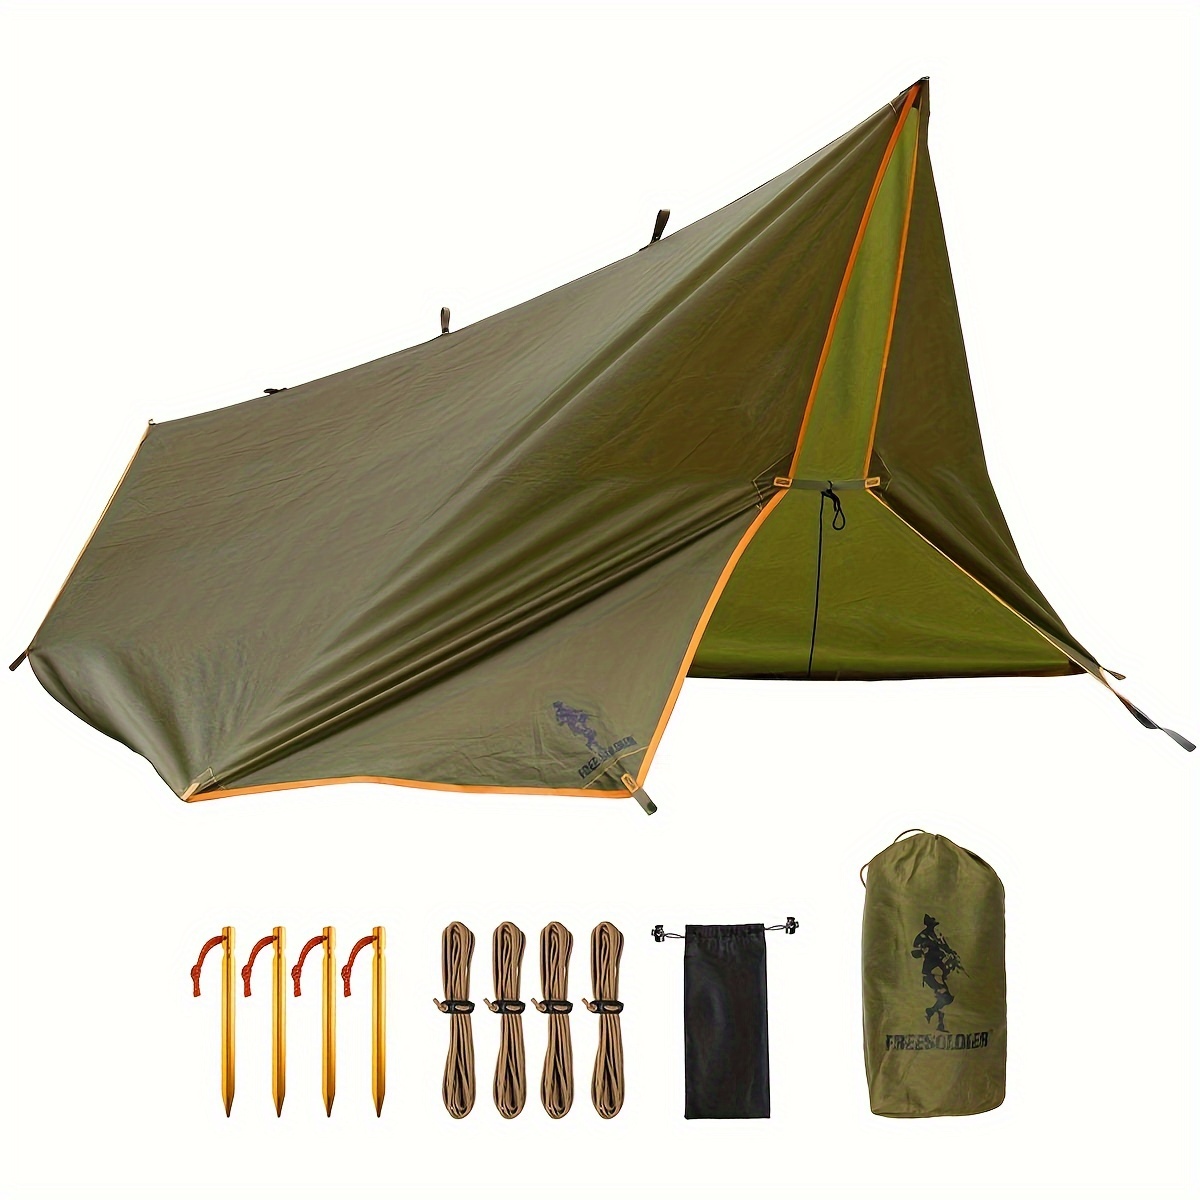 

Outdoor Camping Tarp Canopy Backpacking Waterproof And Uv Protect, Portable, Foldable Tent For Garden, Hiking, Outdoor Survival